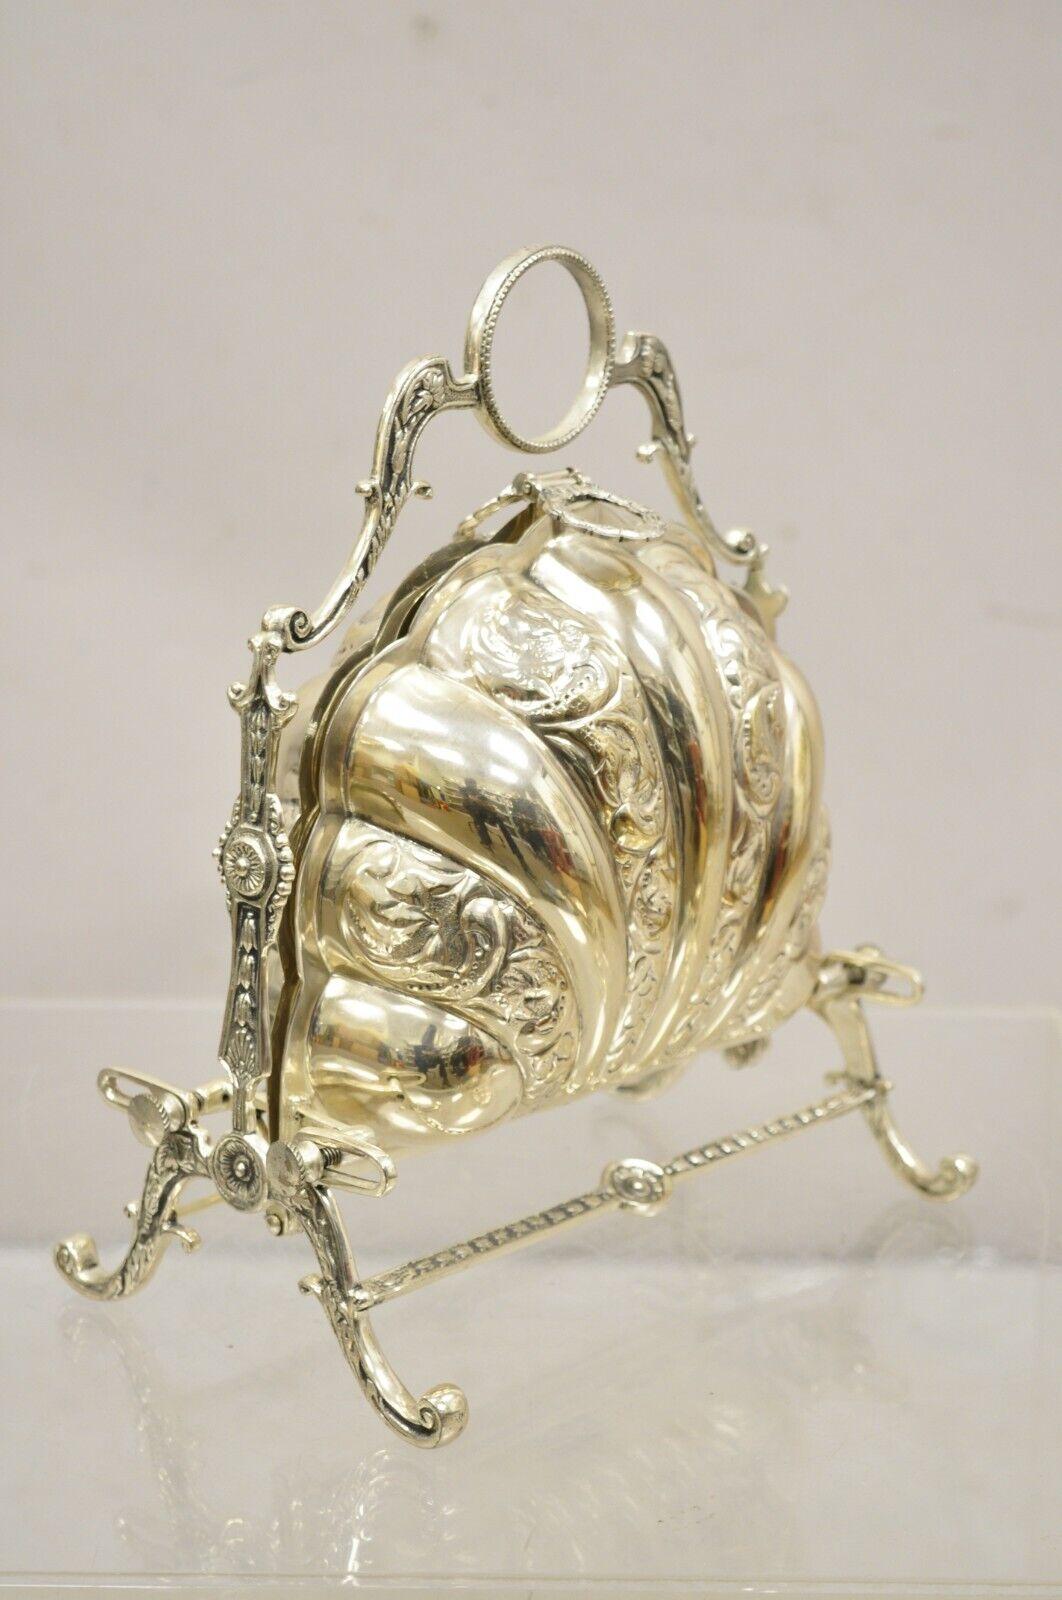 Vintage Andrea by Sadek Victorian Style Silver Plated Clam Shell Biscuit Box. Circa late 20th Century. Measurements: 10.5